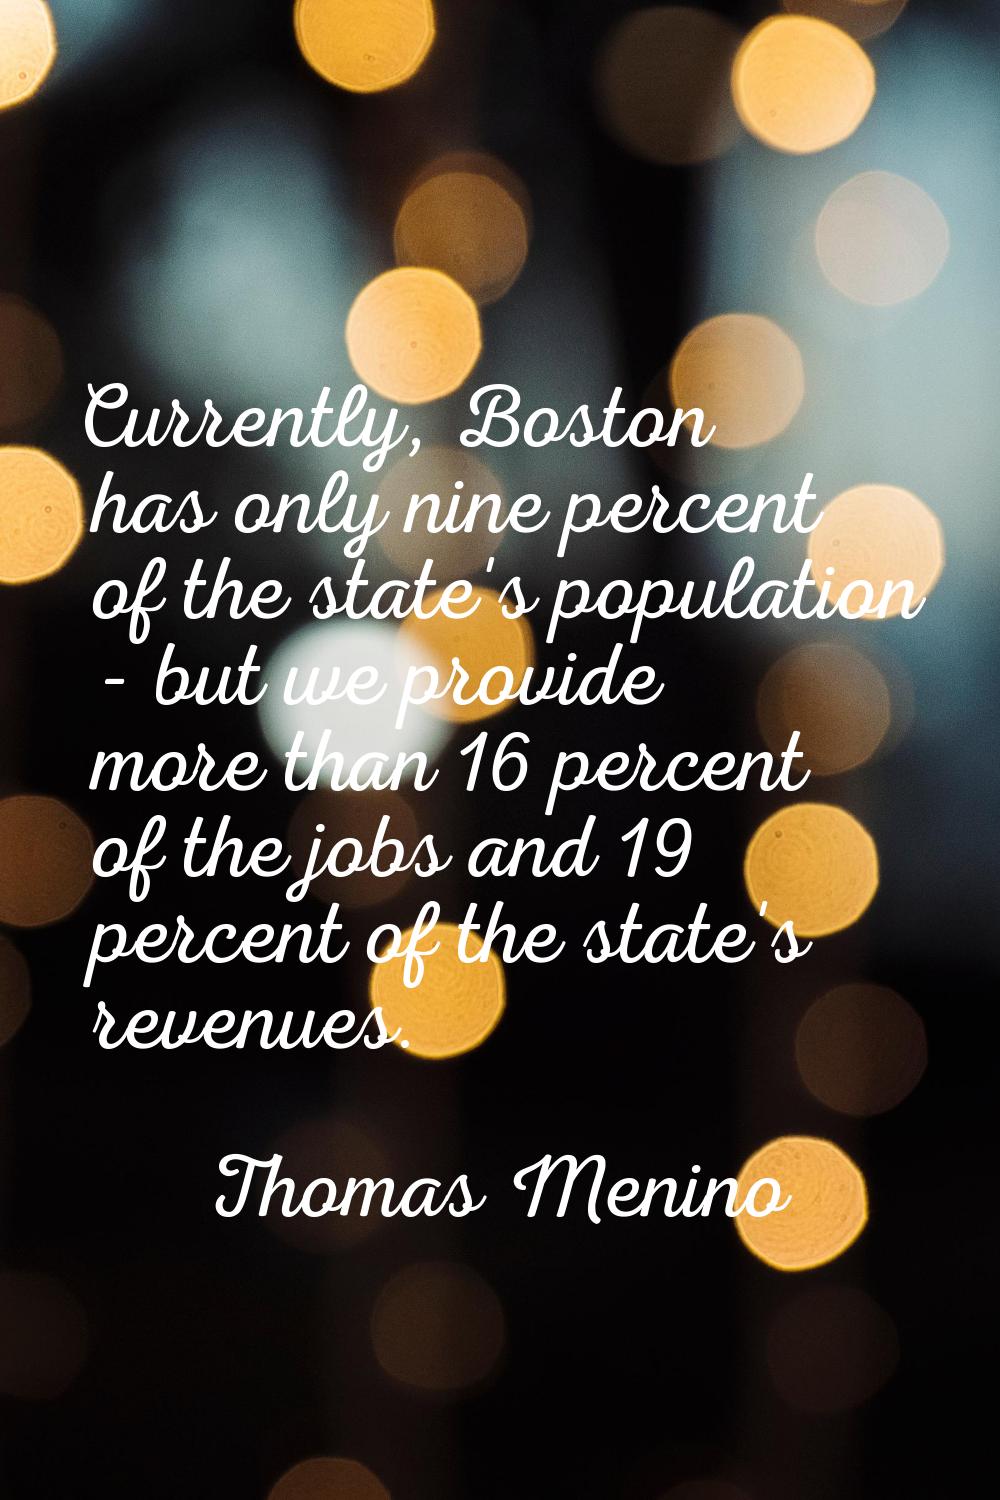 Currently, Boston has only nine percent of the state's population - but we provide more than 16 per